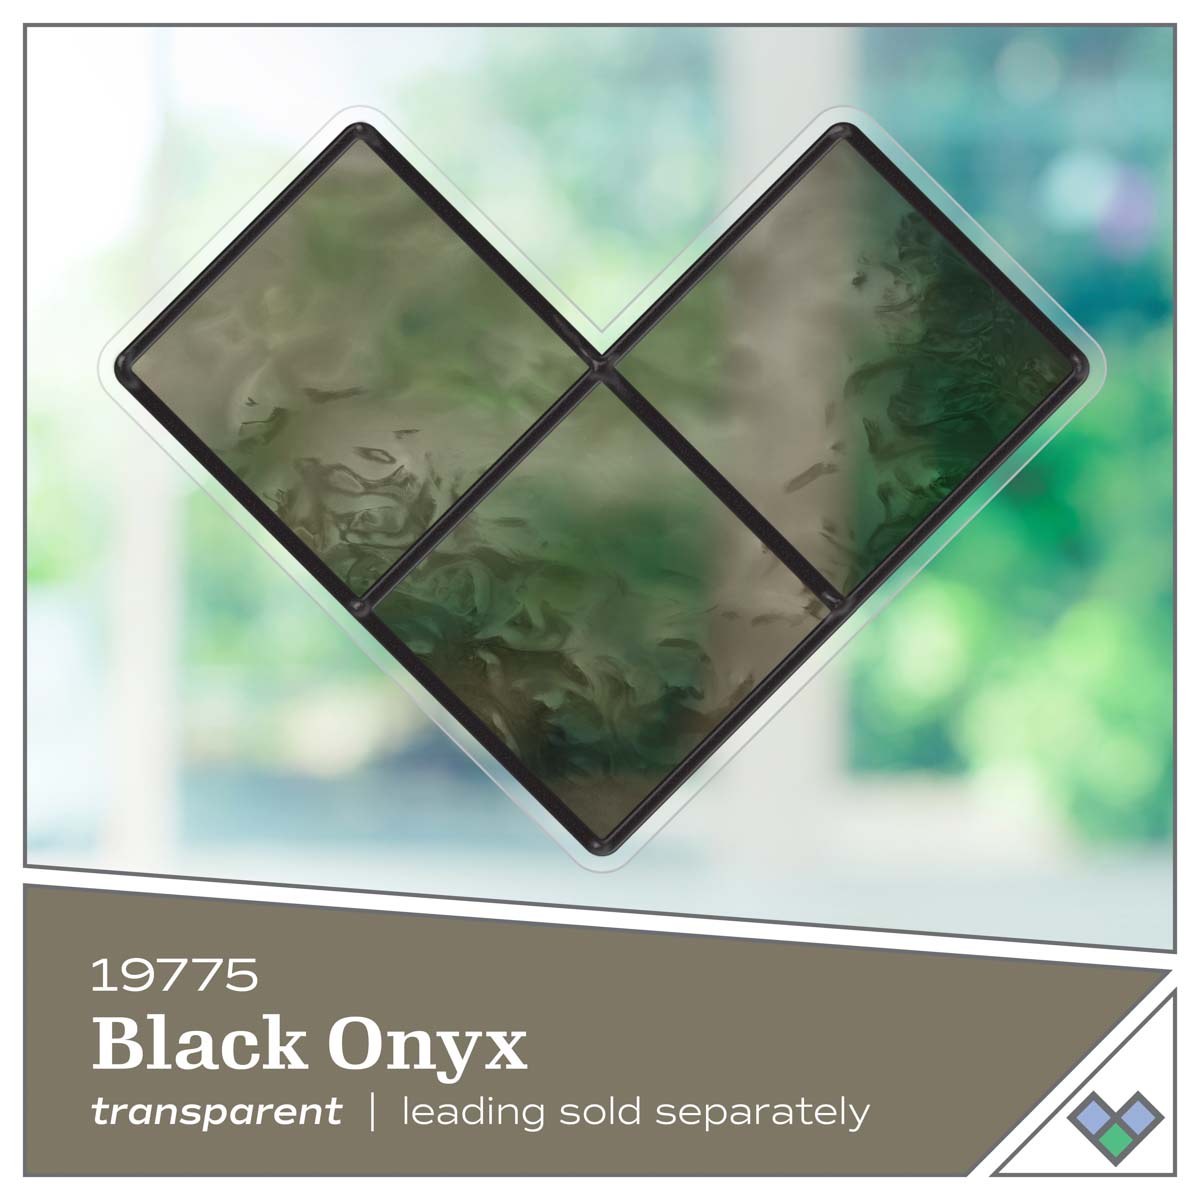 Gallery Glass ® Stained Glass Effect Paint - Black Onyx, 2 oz. - 19775